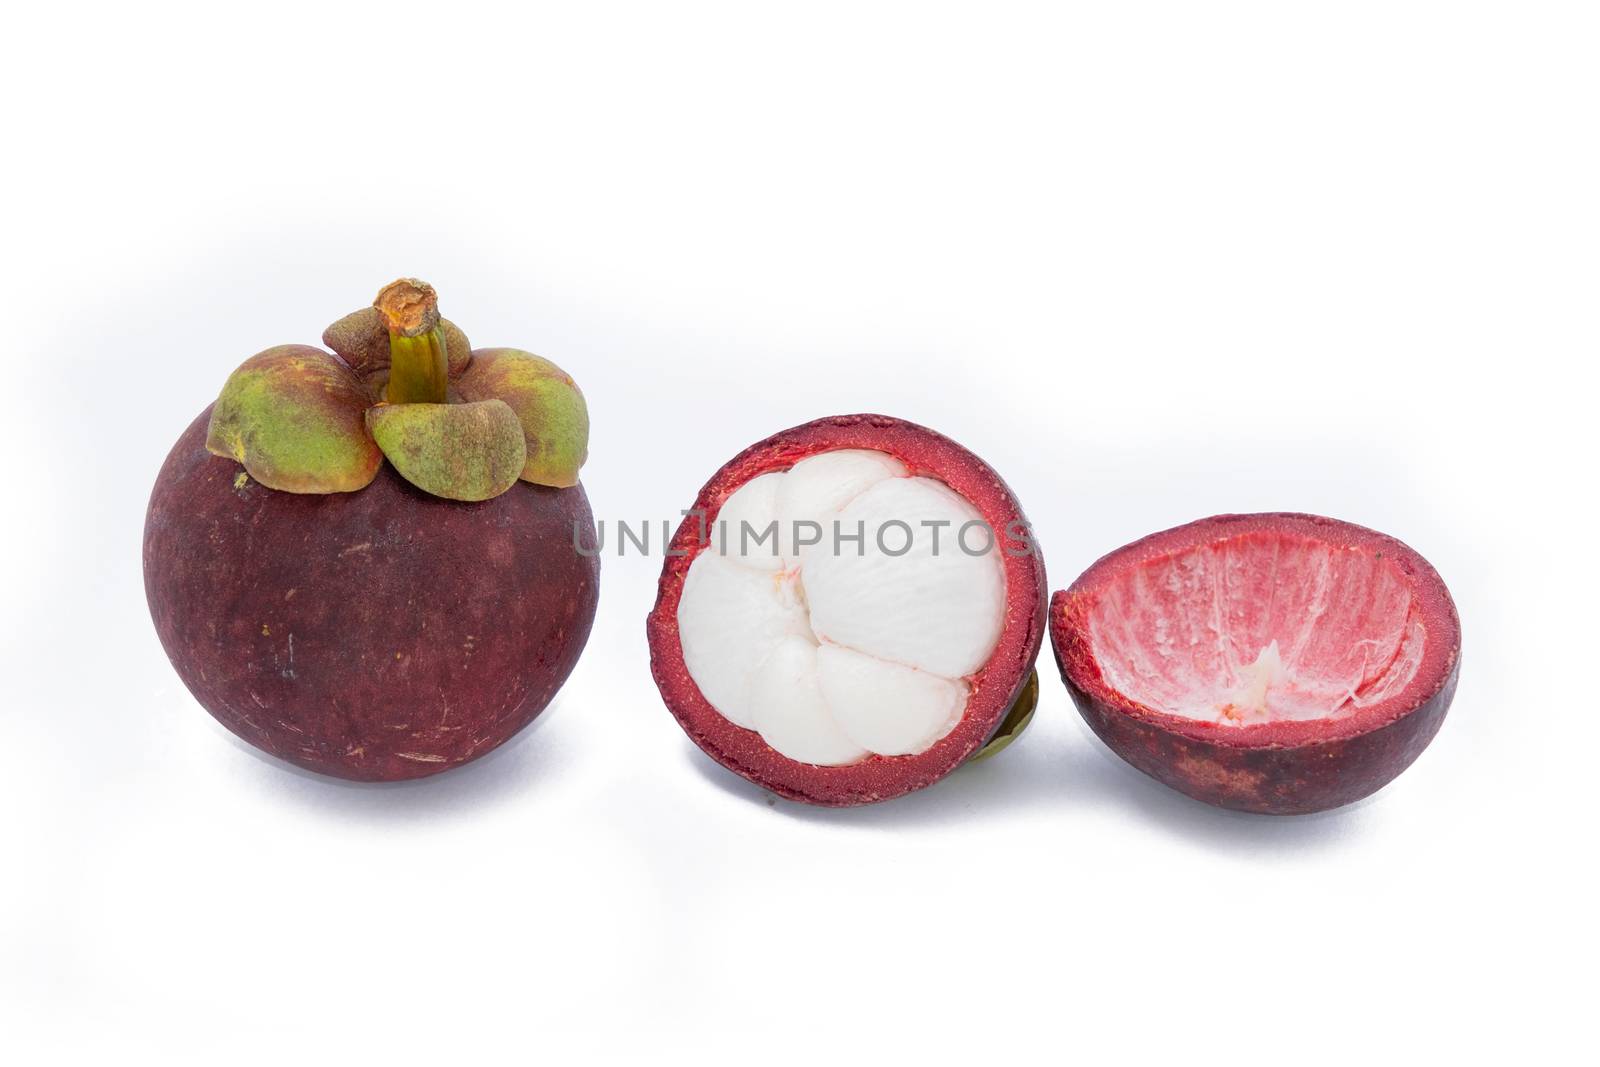 Mangosteen and cross section showing the thick purple skin and white flesh of the queen of fruits, Delicious mangosteen fruit arranged on a bowl, Mangosteen flesh, closeup. Mangosteen. by peerapixs